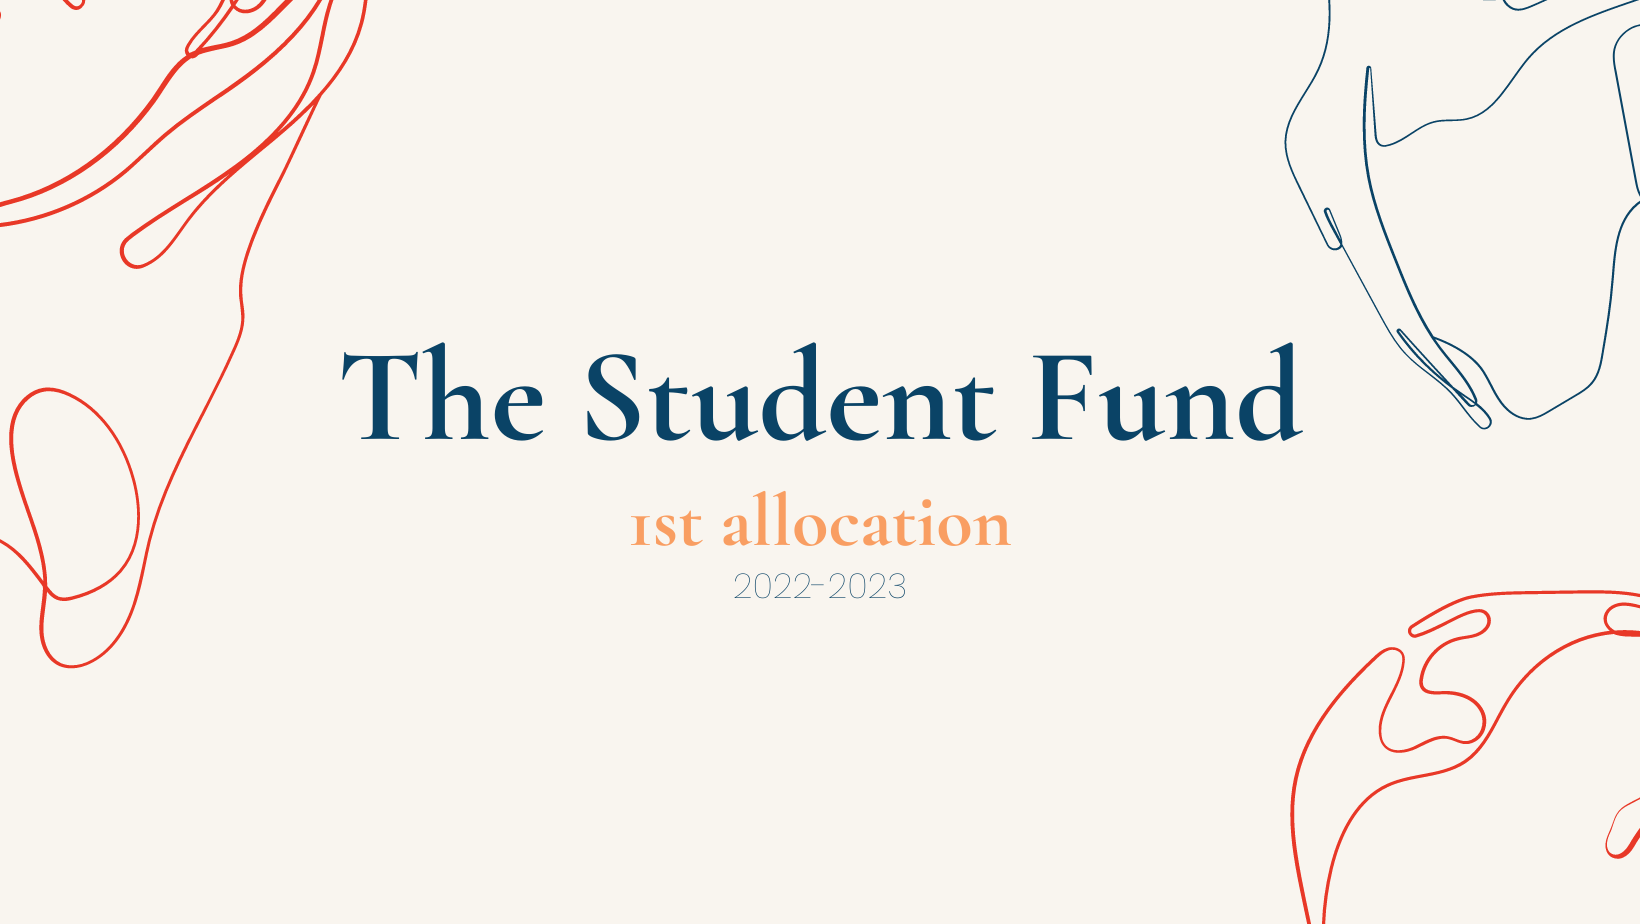 The Student Fund opens for applications for its 1st allocation